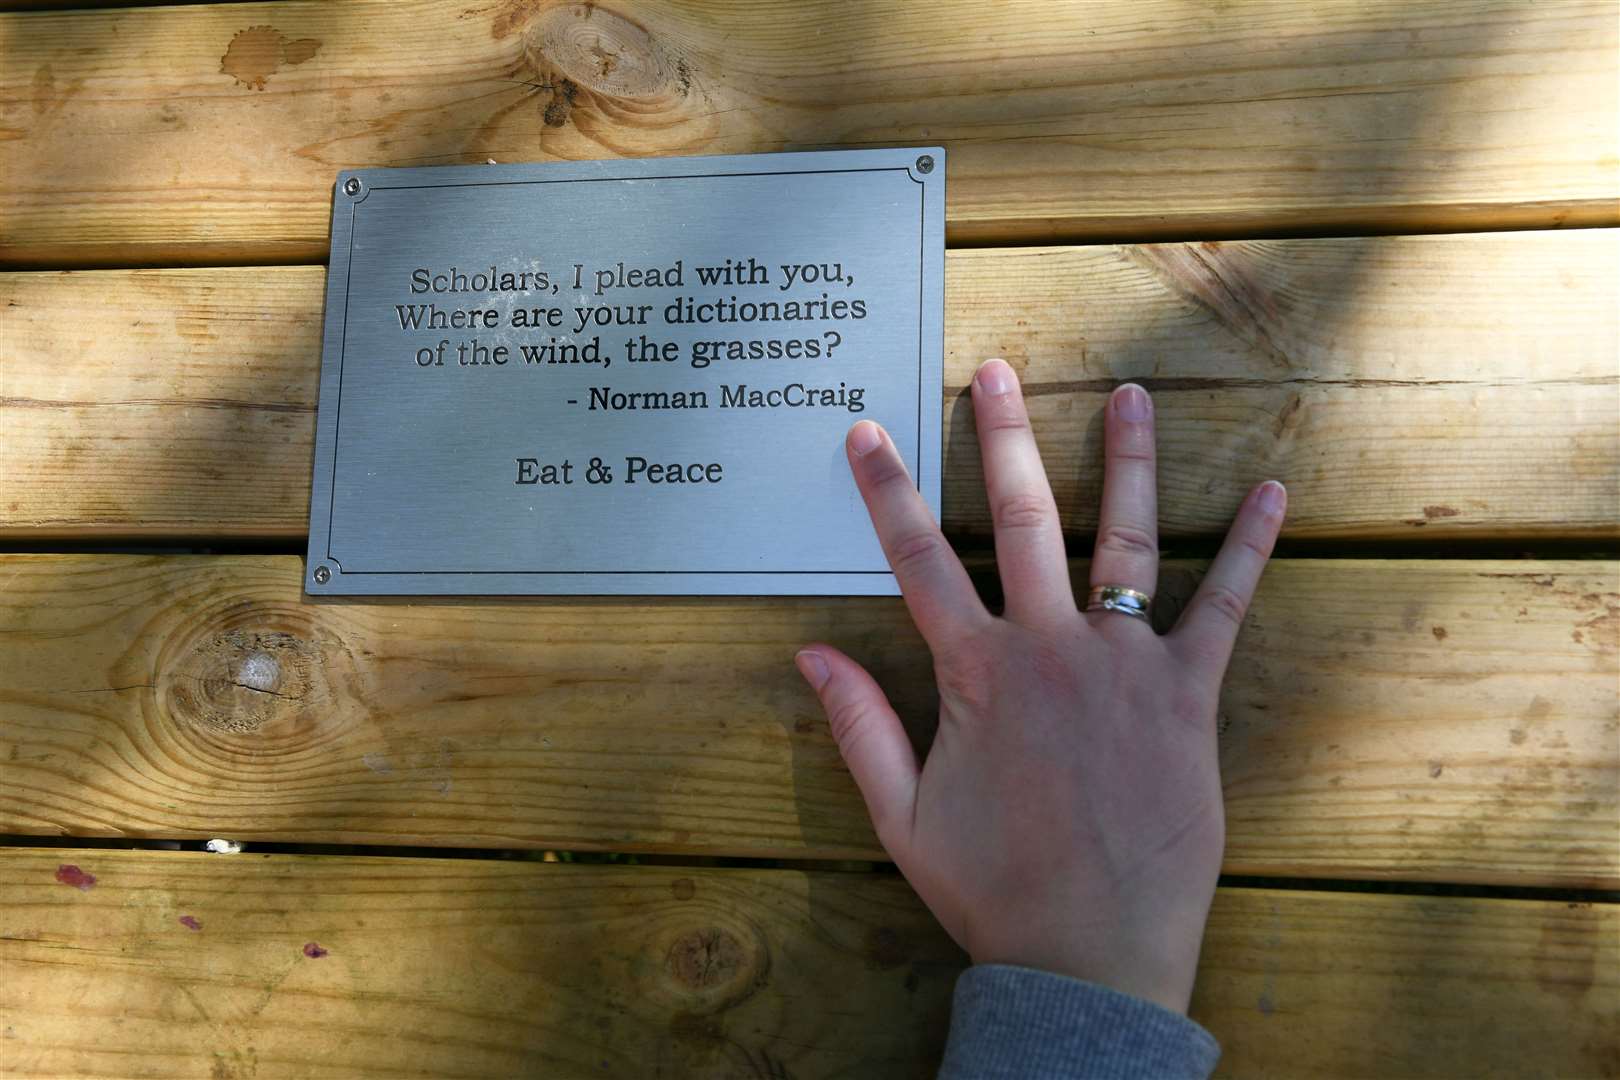 Aoife Lyall curated a number of texts and quotations, chosen to inspire peaceful thoughts, that appear on each table.